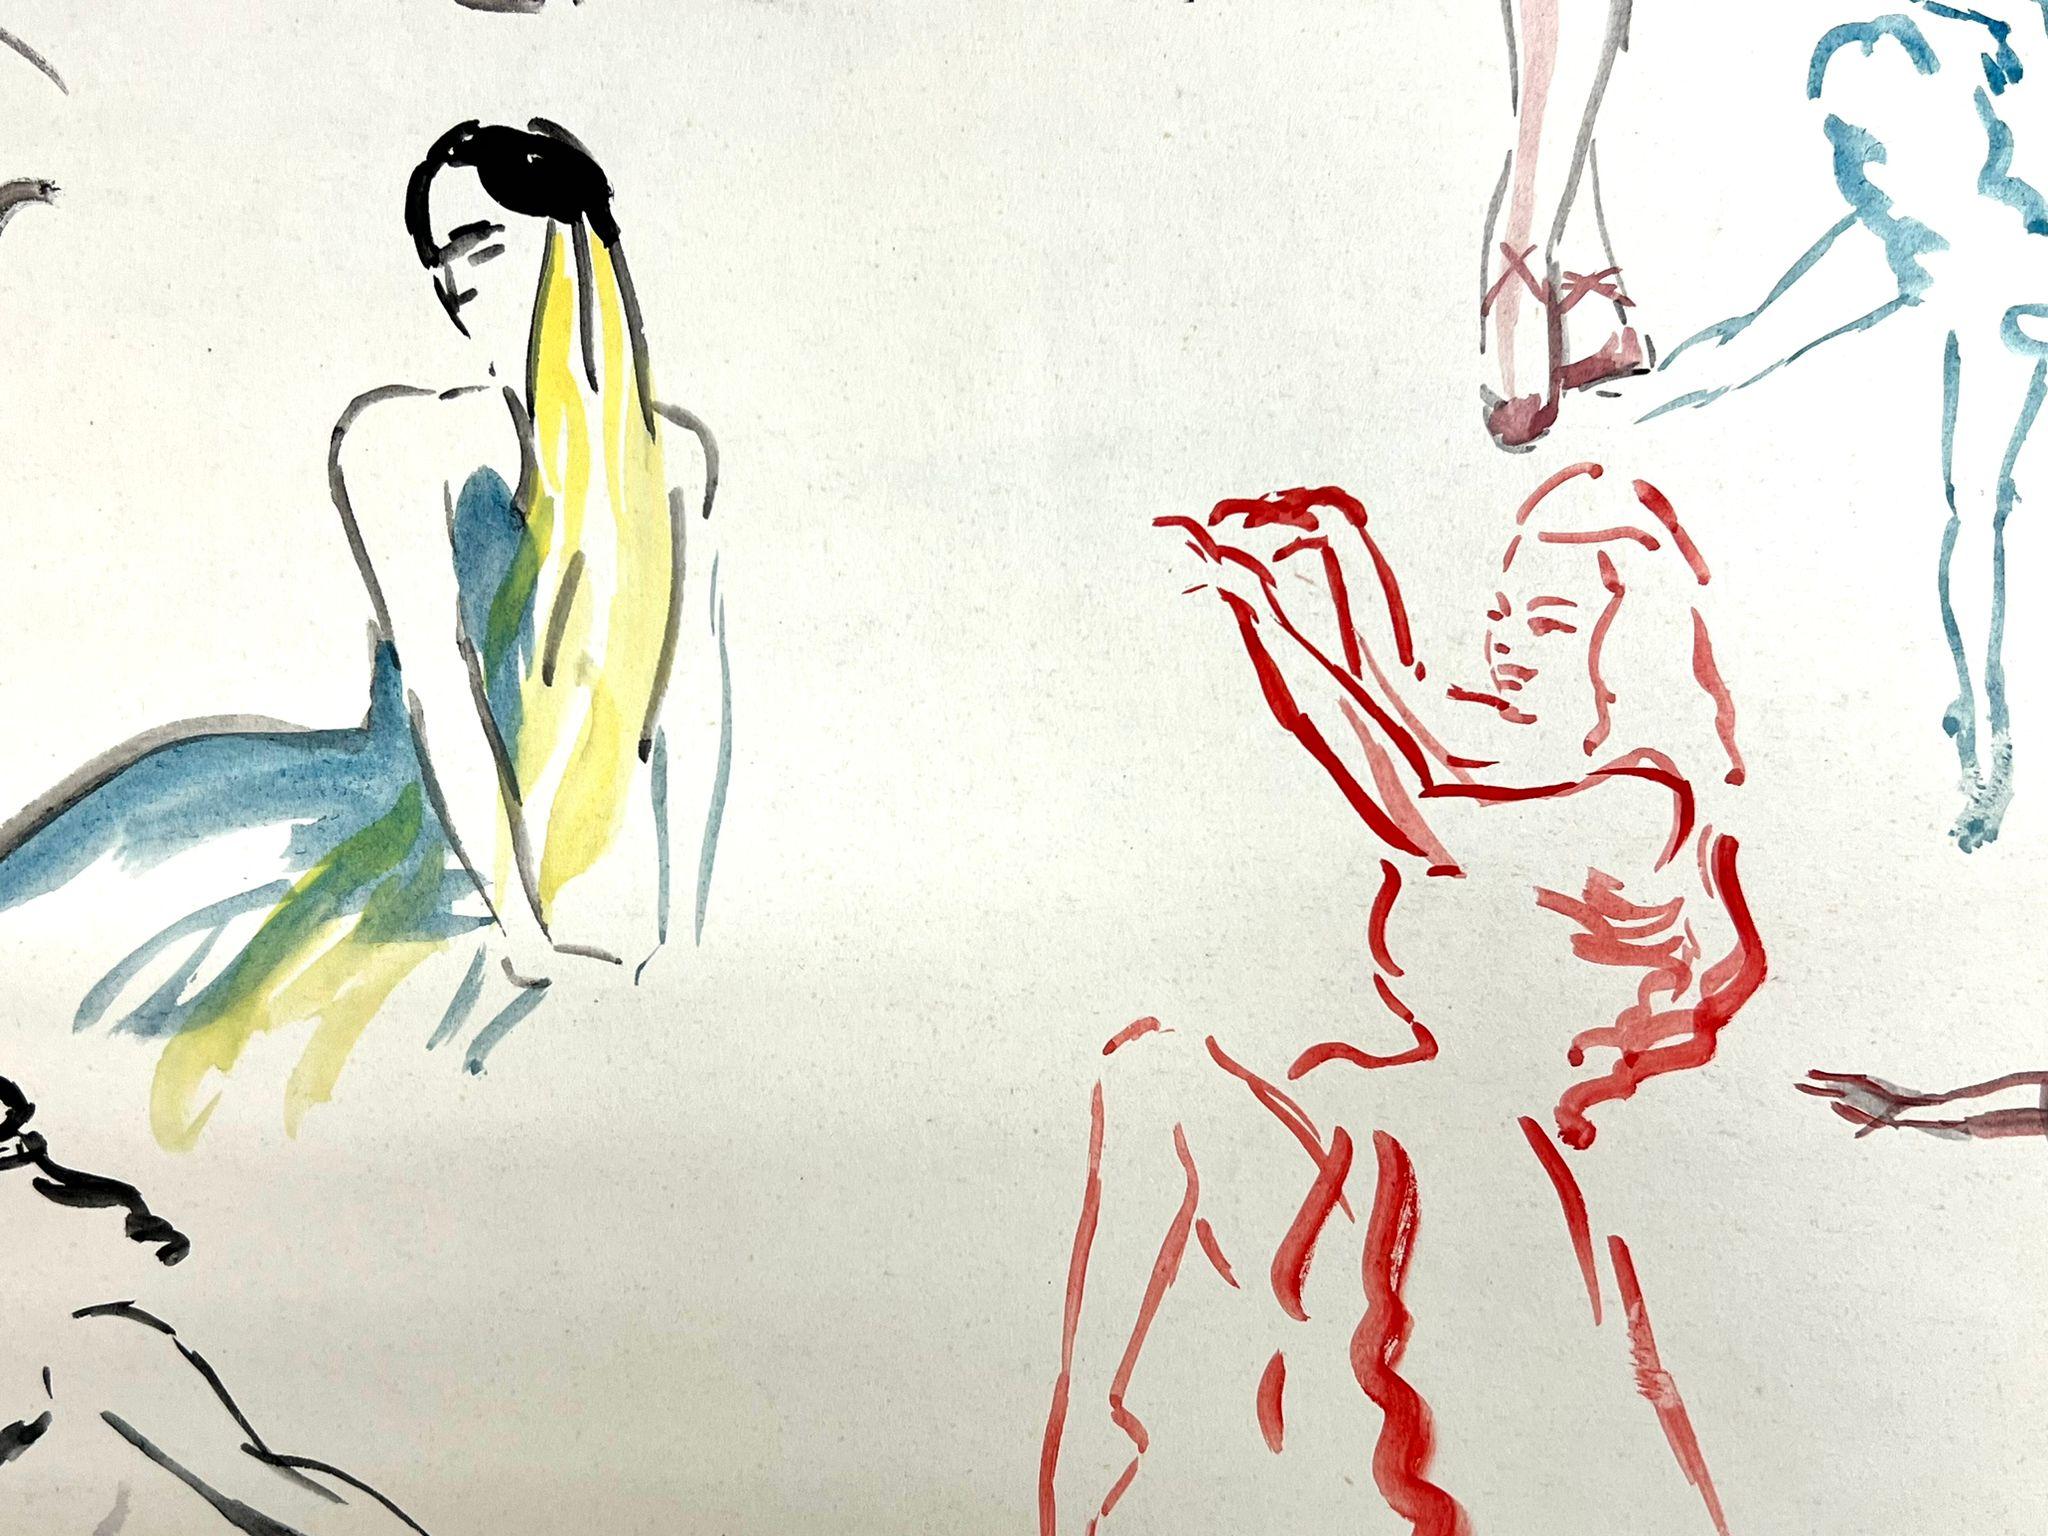 Mid Century French Illustration Sketches Of Dancing Figures  - Painting by Josine Vignon